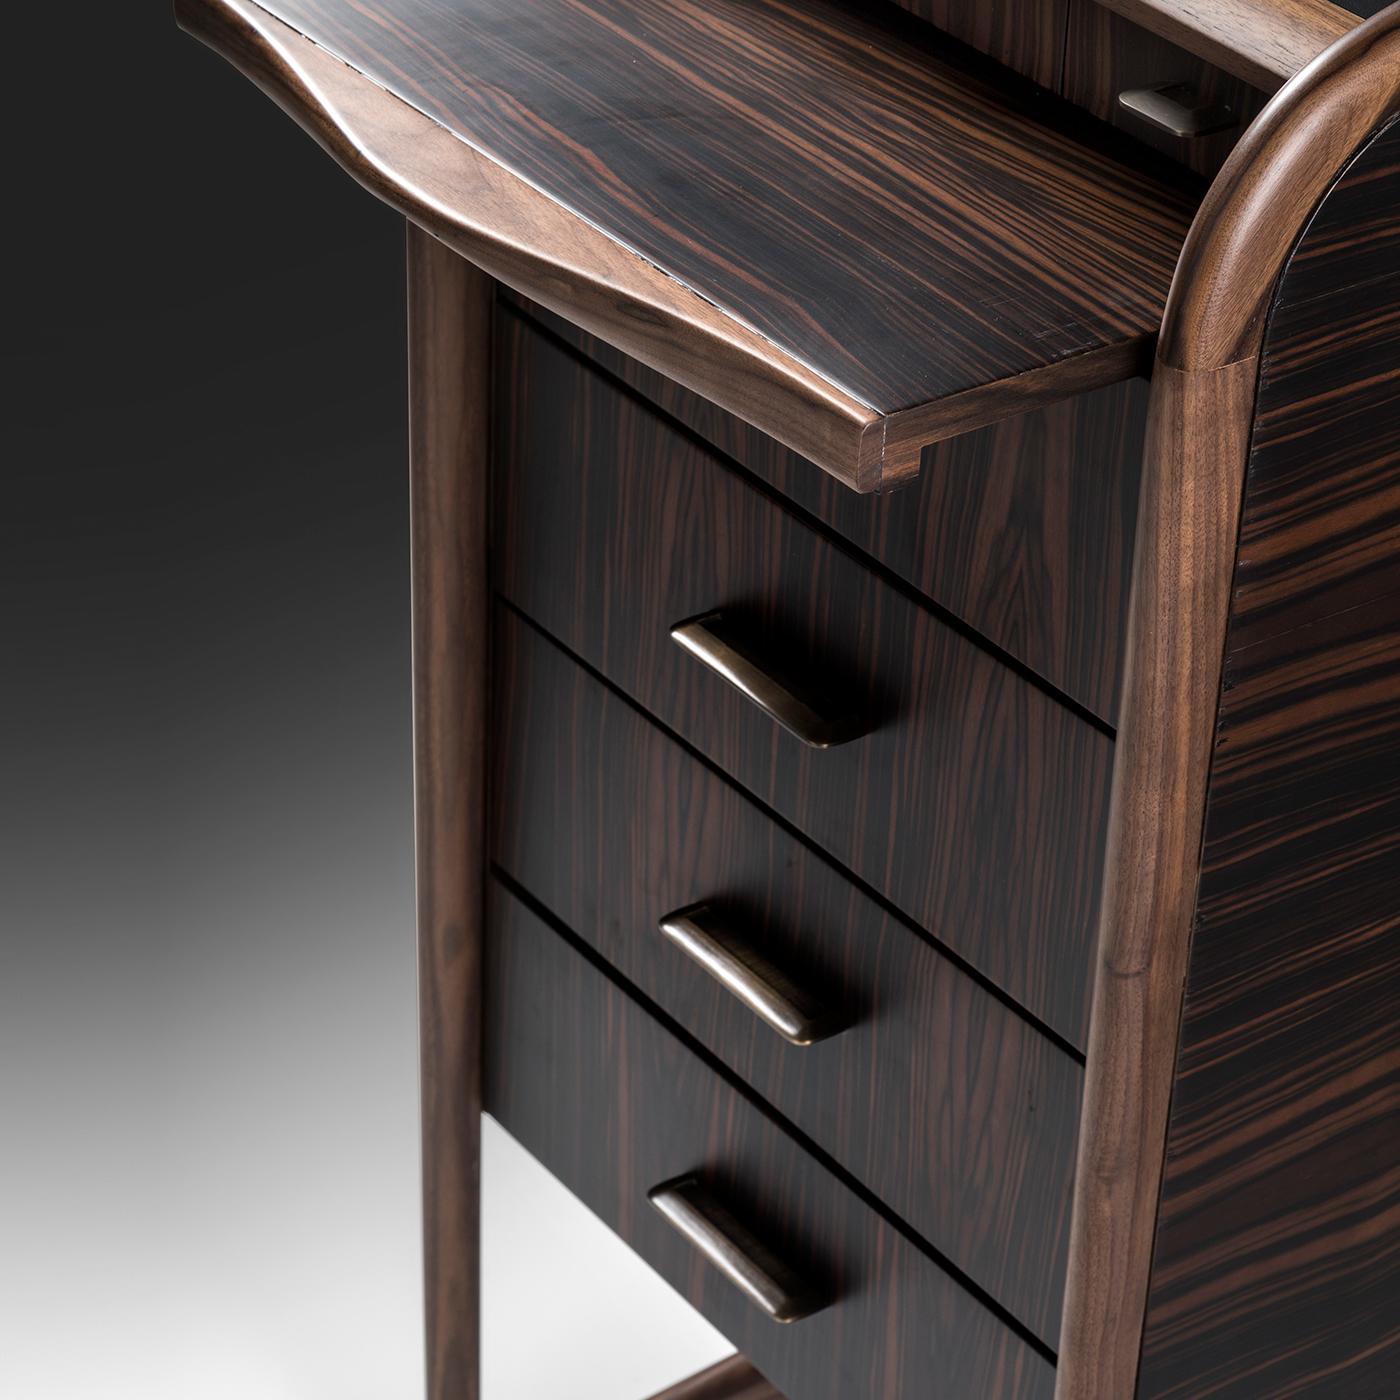 Lightweight and versatile, this fine chest of drawers is a sculptural piece providing a classic-inspired touch in any interior space. The ebony storage unit is organized in four large and three small drawers and is gracefully supported by a sinuous